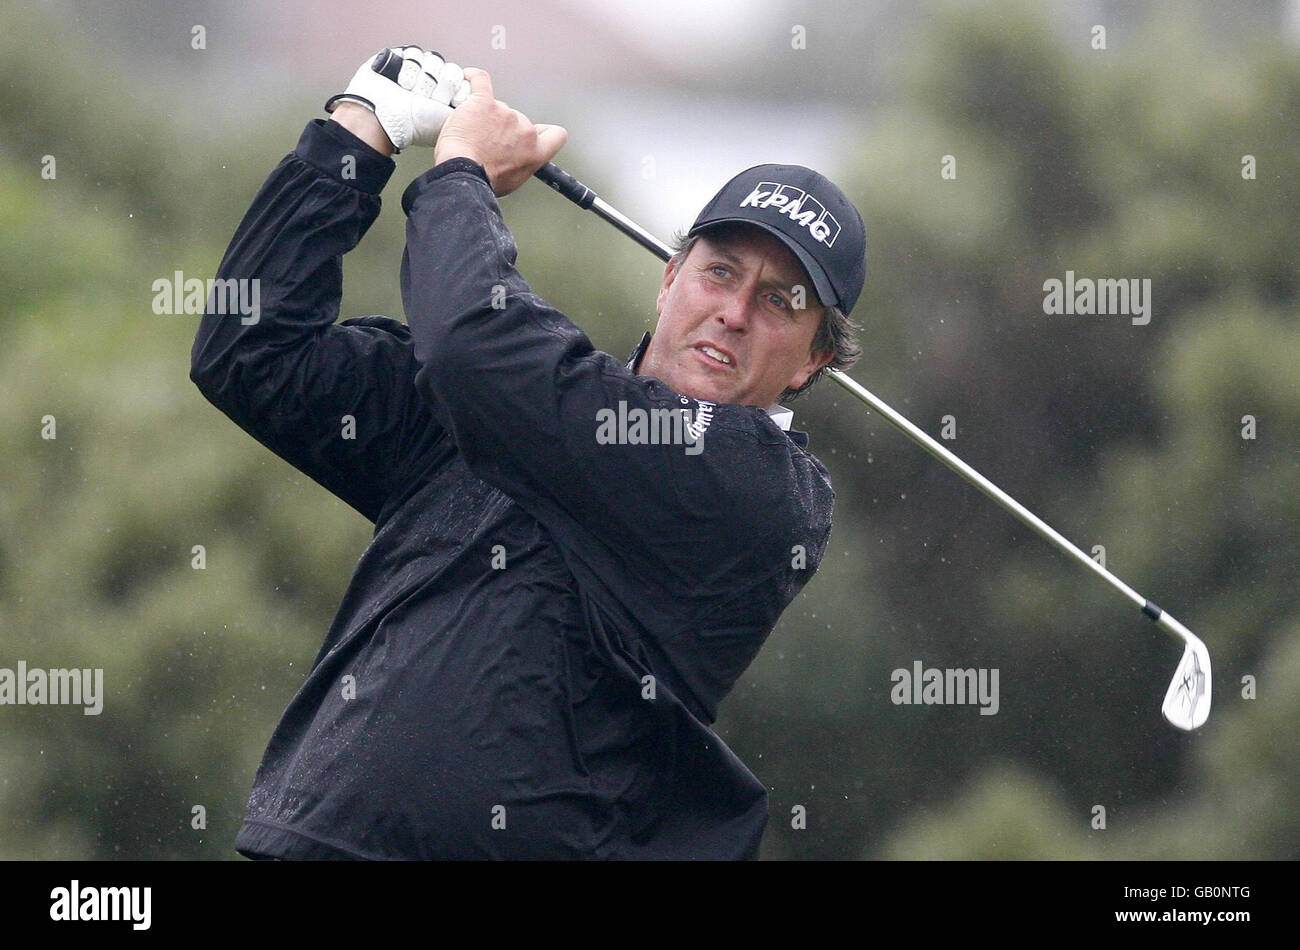 Golf - Open 2008 Championship - Day One - Royal Birkdale Golf Club. USA's Phil Mickelson during Round One of the Open Championship at the Royal Birkdale Golf Club, Southport. Stock Photo